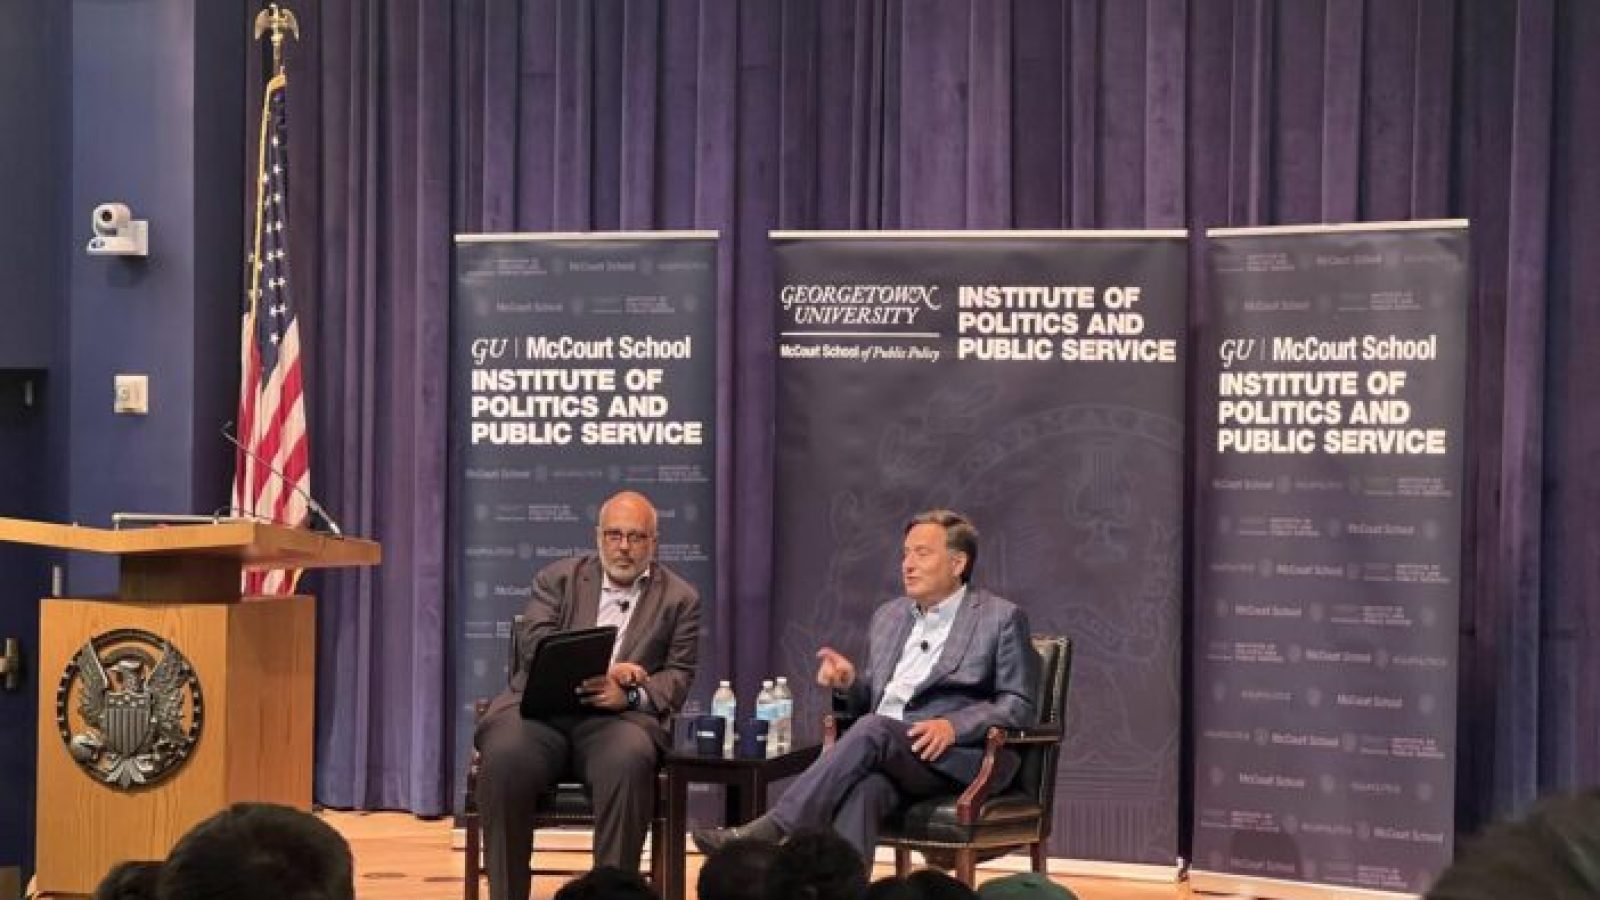 GU Politics Executive Director Mo Elleithee and Former White House Chief of Staff Ron Klain sit on a stage with GU Politics banners in the background.